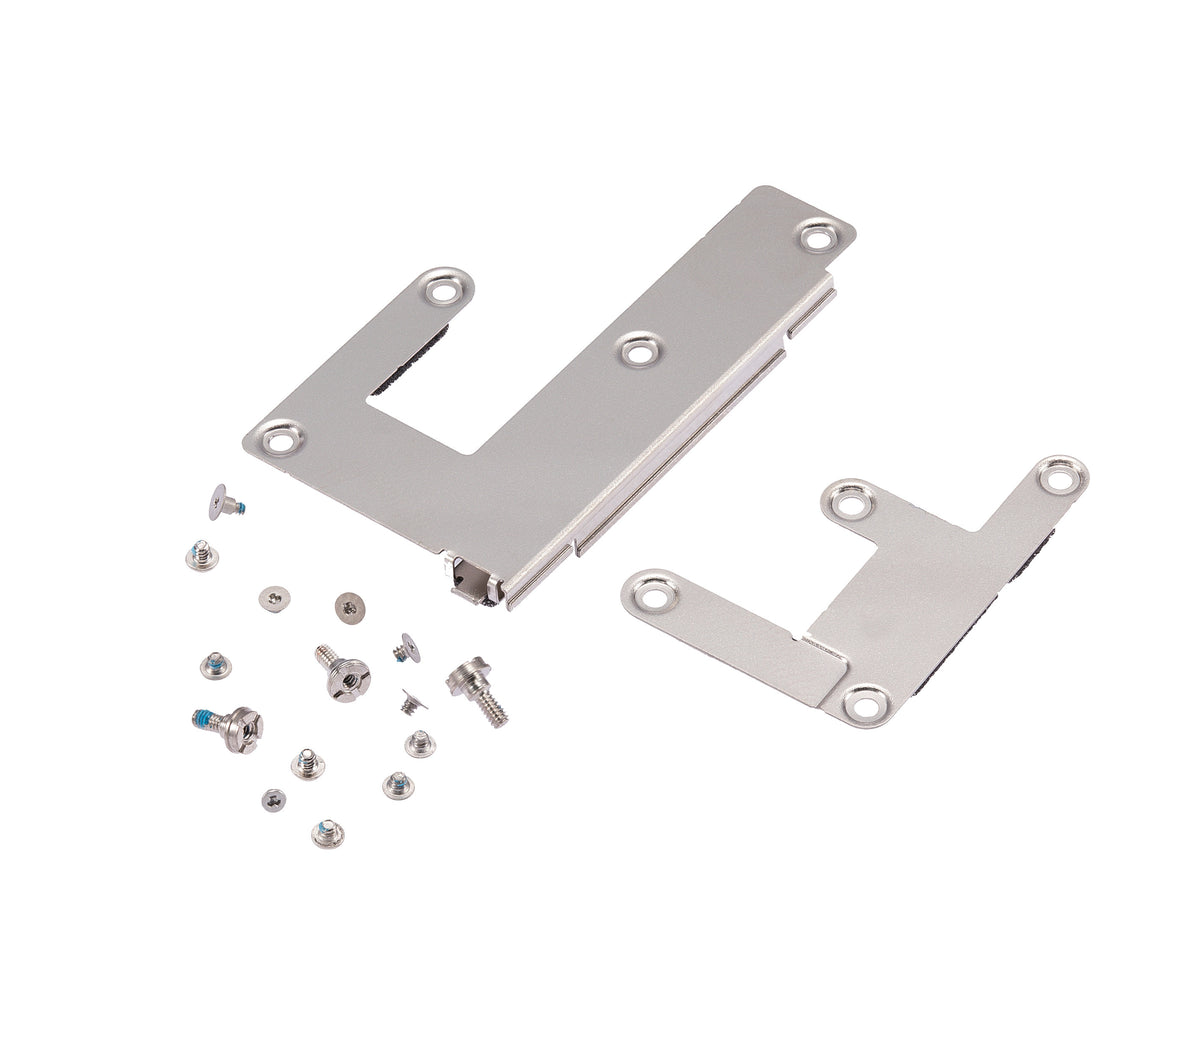 SMALL METAL BRACKET (ON MOTHERBOARD) COMPATIBLE WITH IPHONE 12 PRO MAX